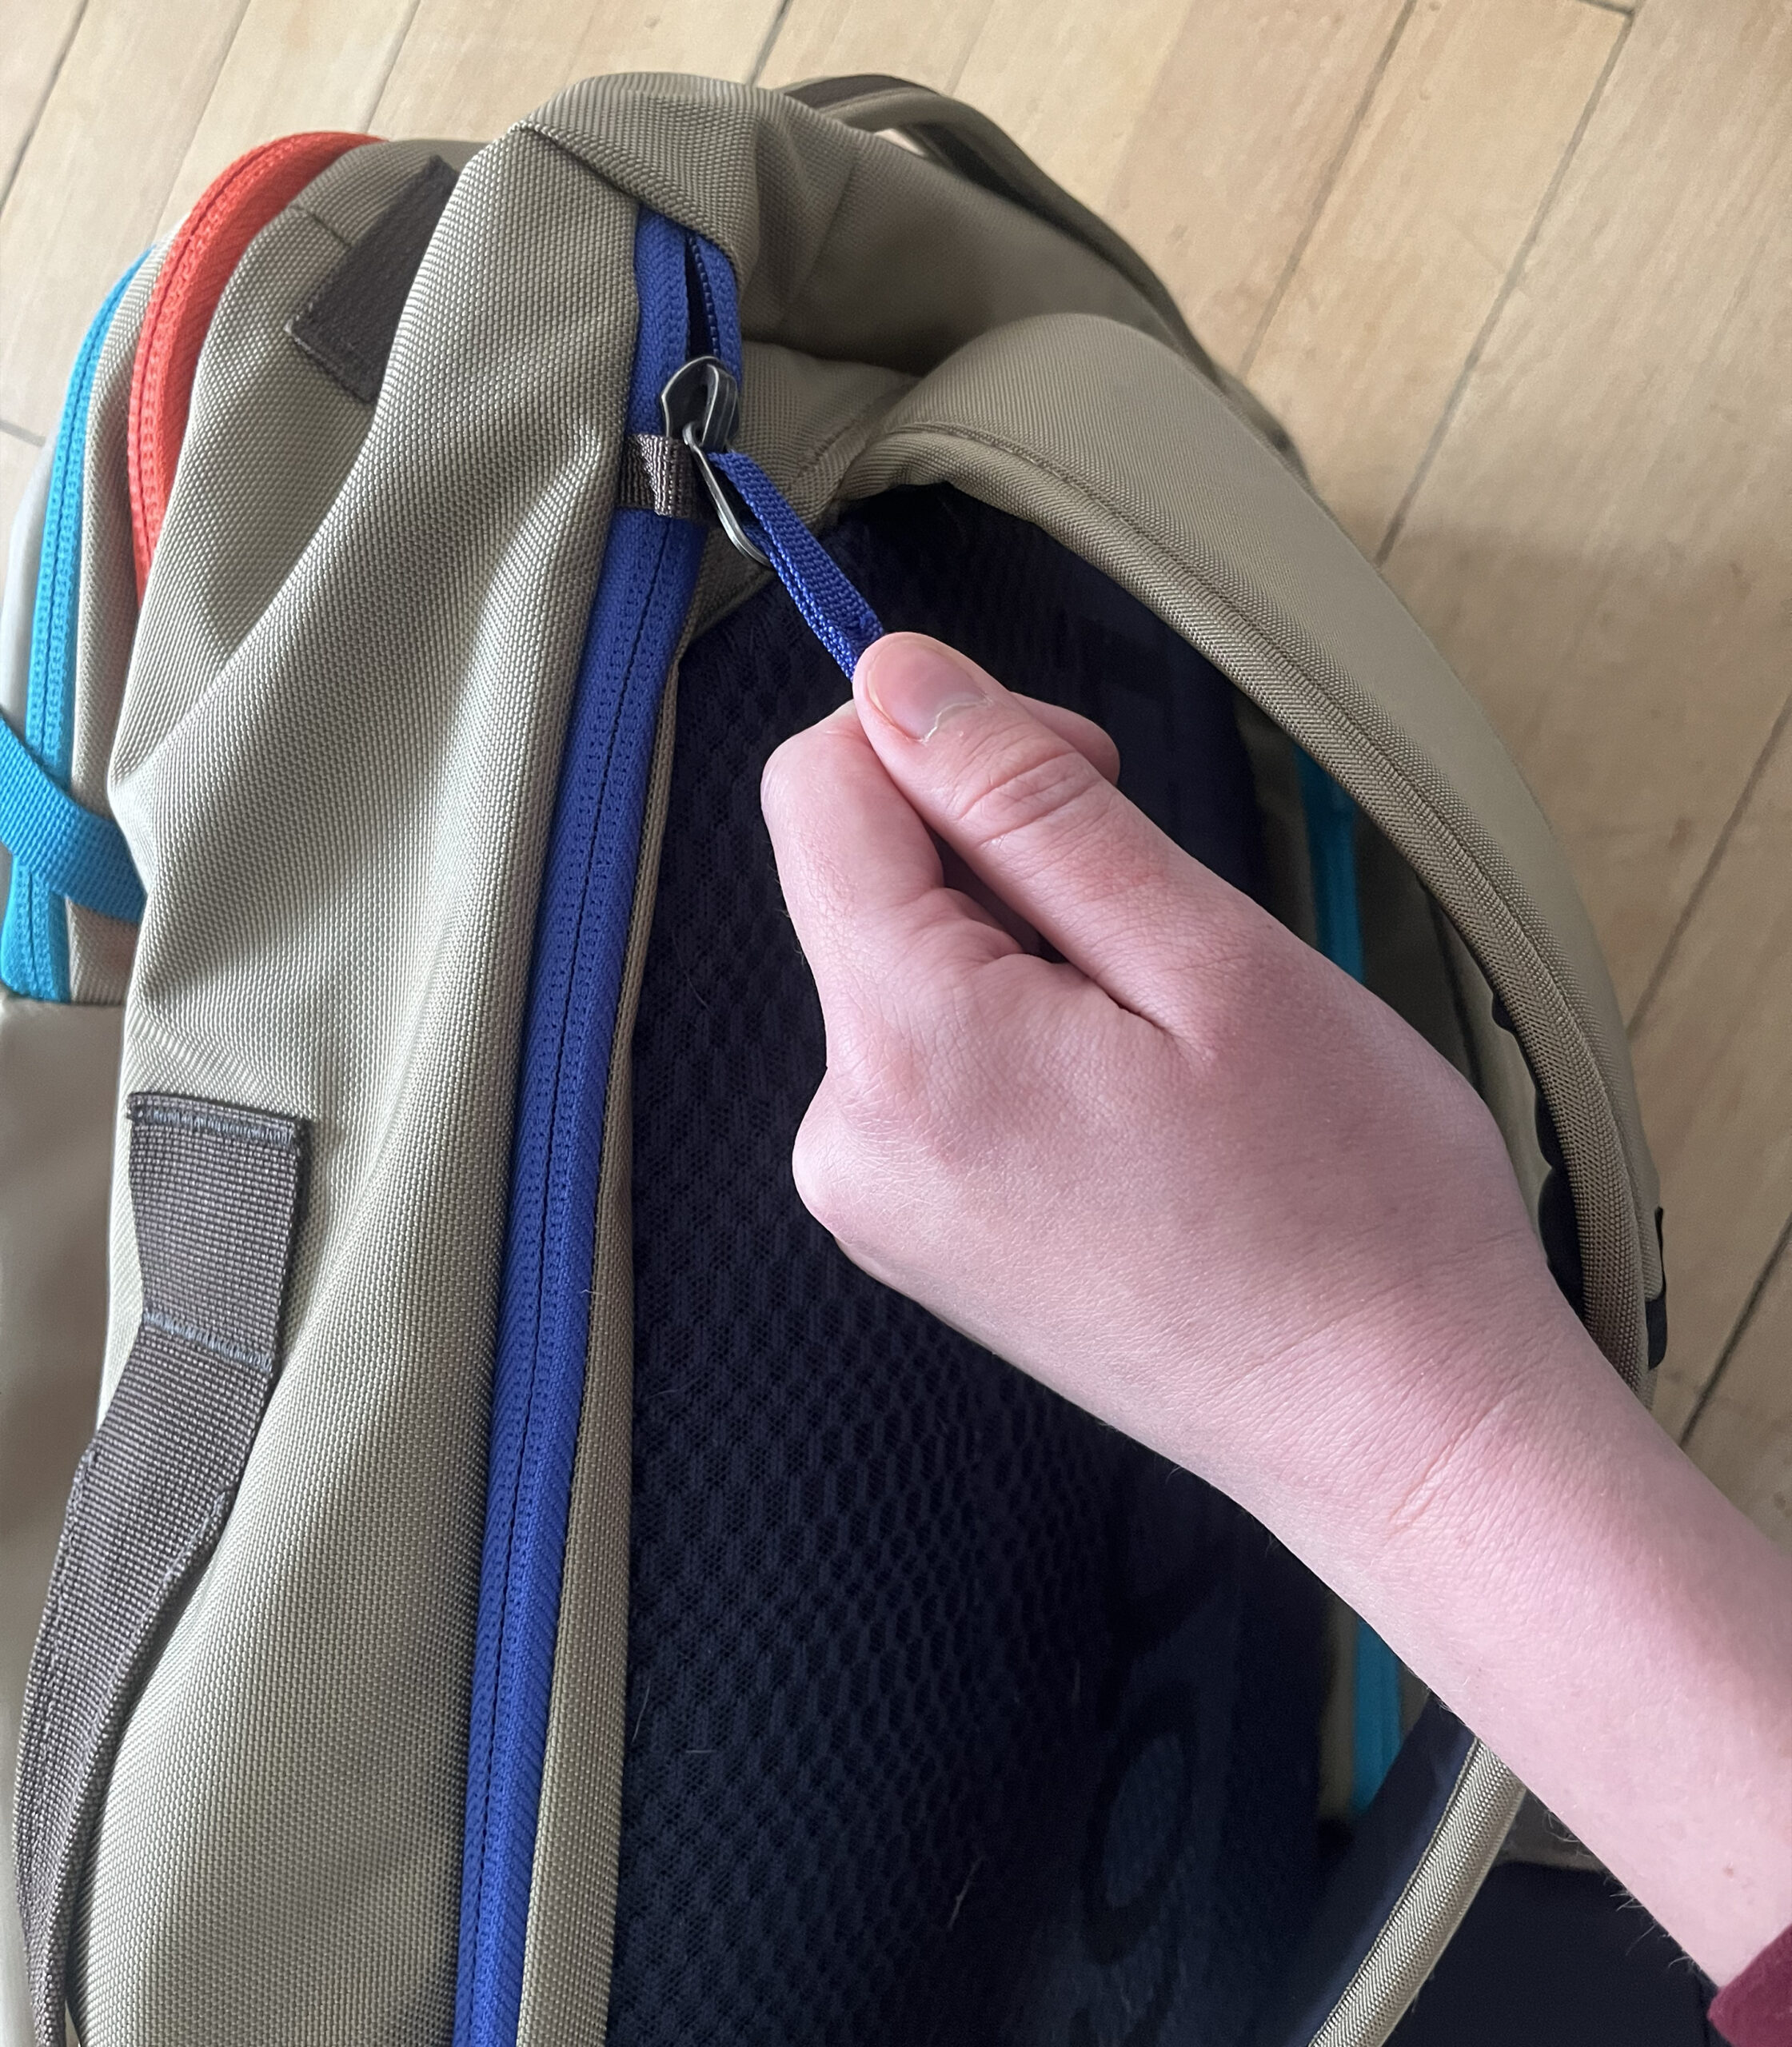 The security zippers are a smart idea, but it can be annoying when zipping or unzipping your own bag.